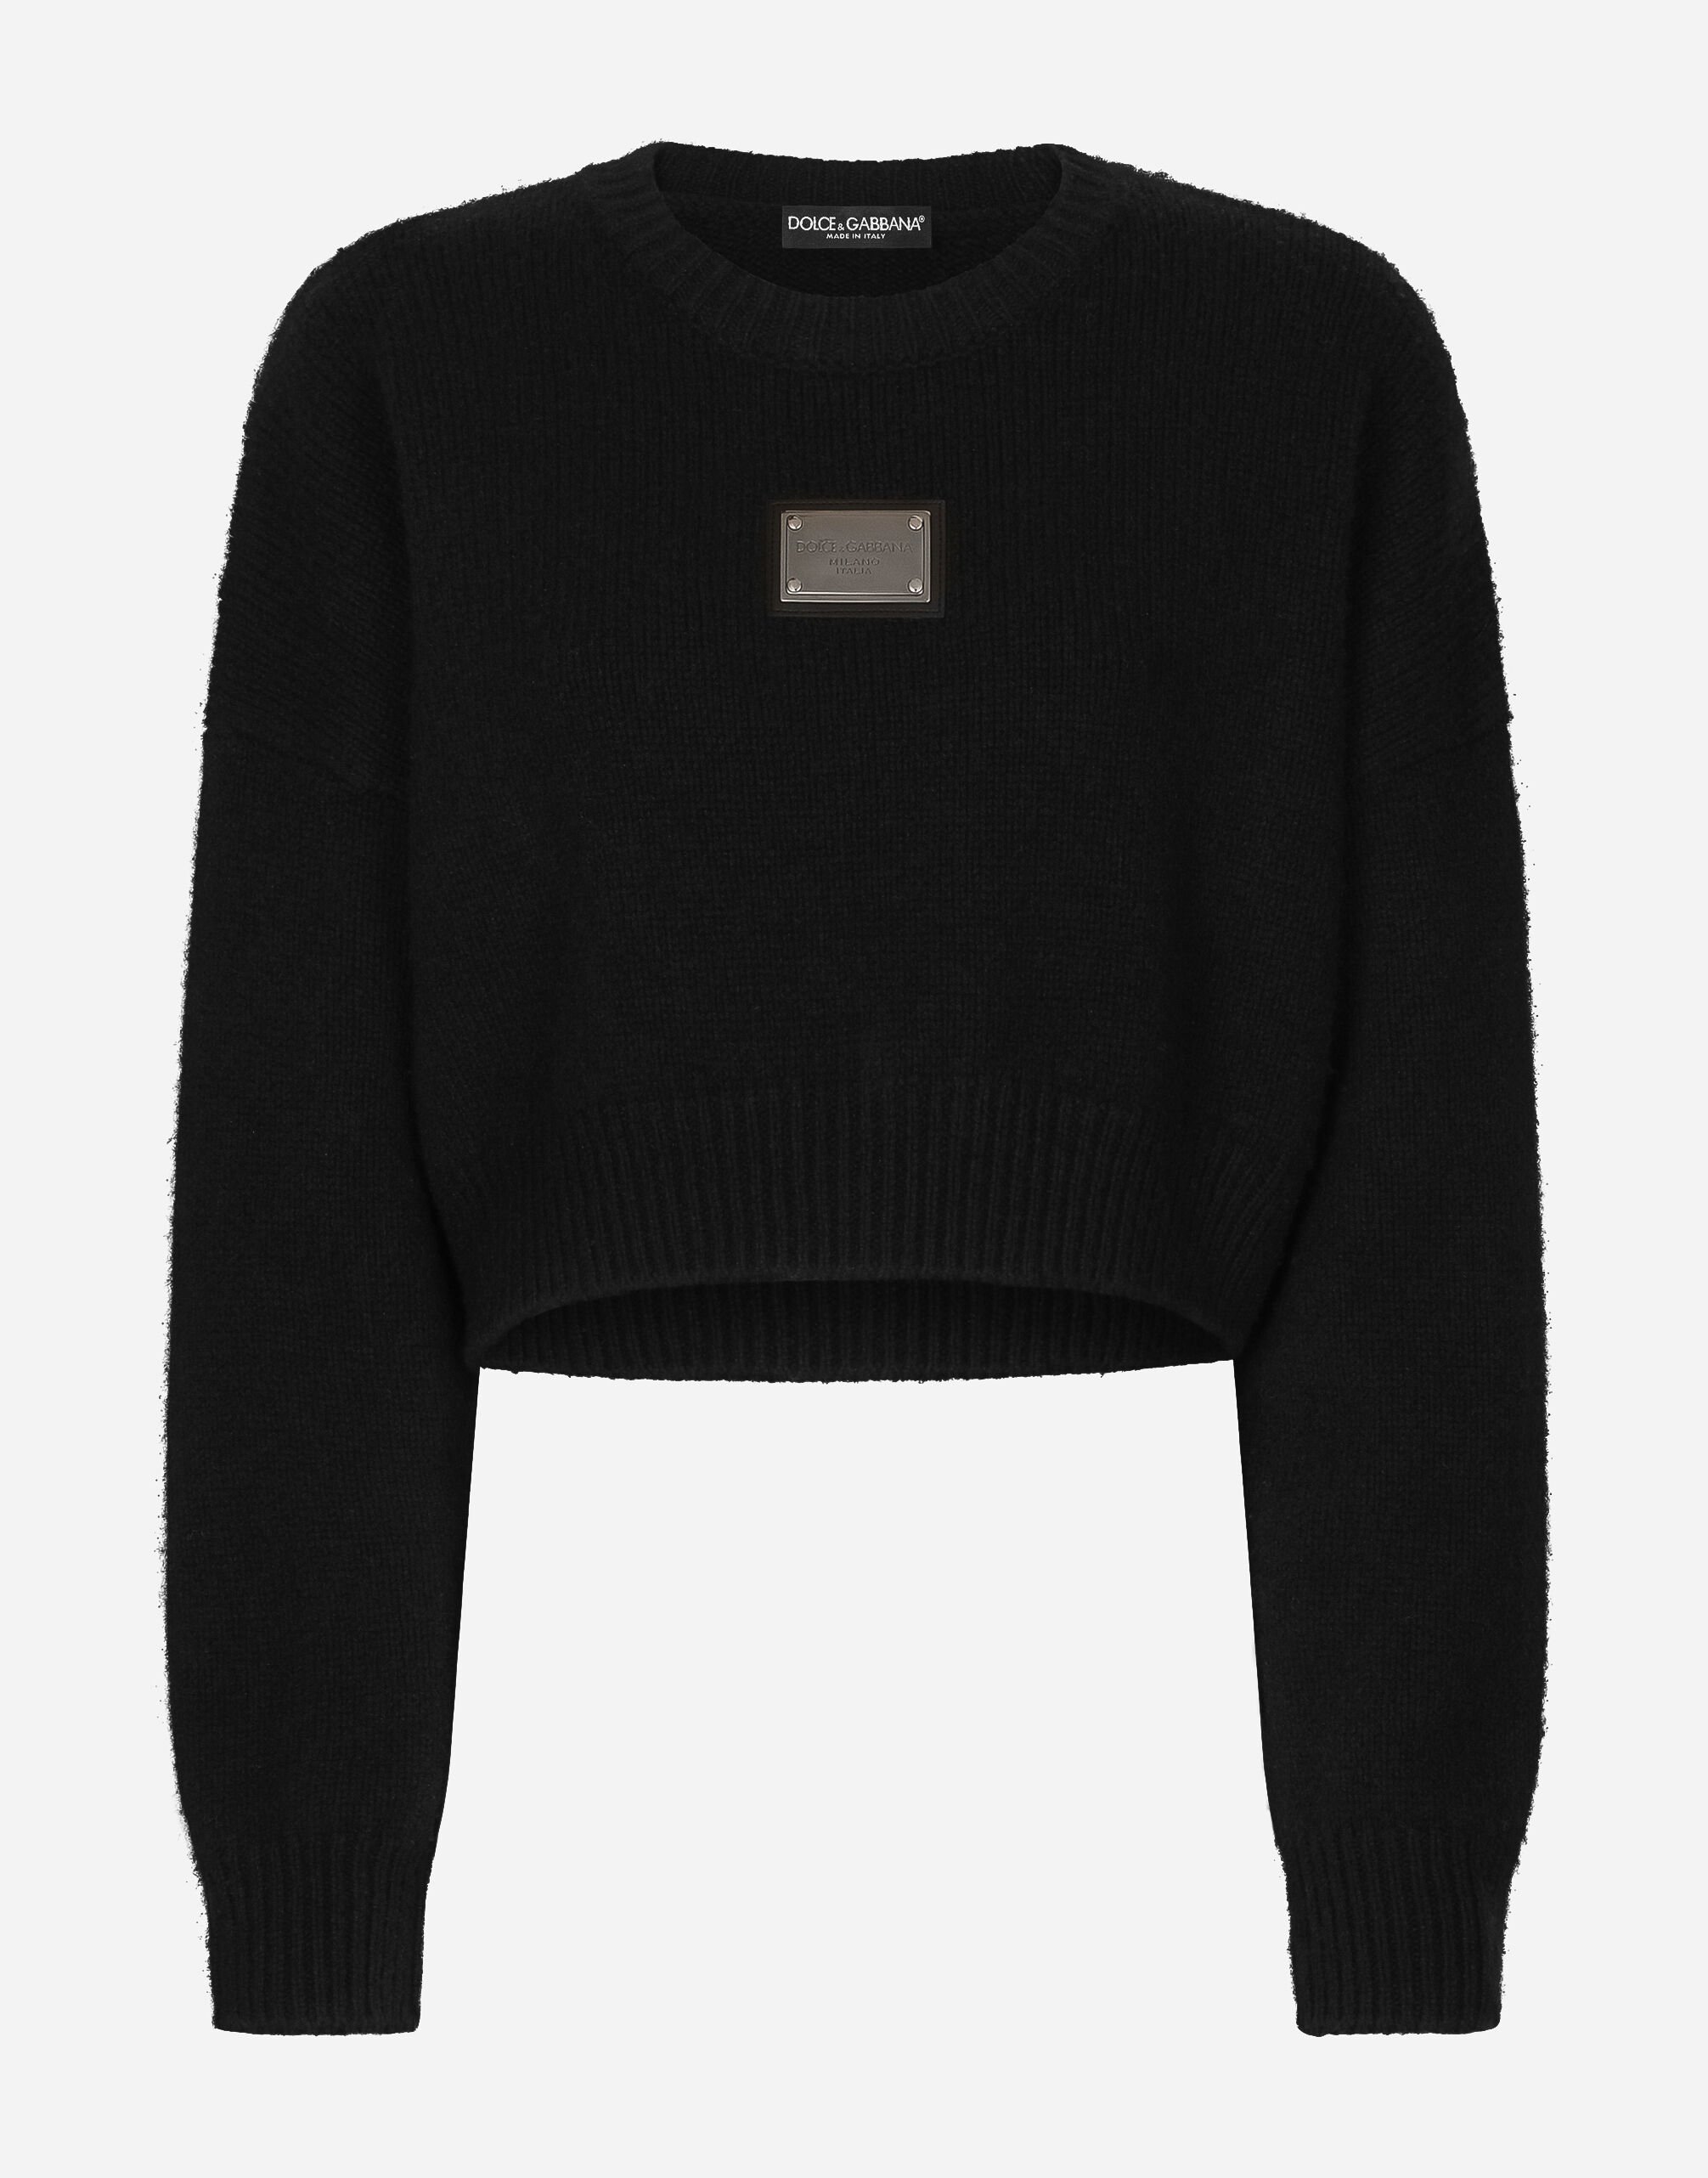 Dolce & Gabbana Wool and cashmere round-neck sweater with logo tag Multicolor FXI25TJBVX8